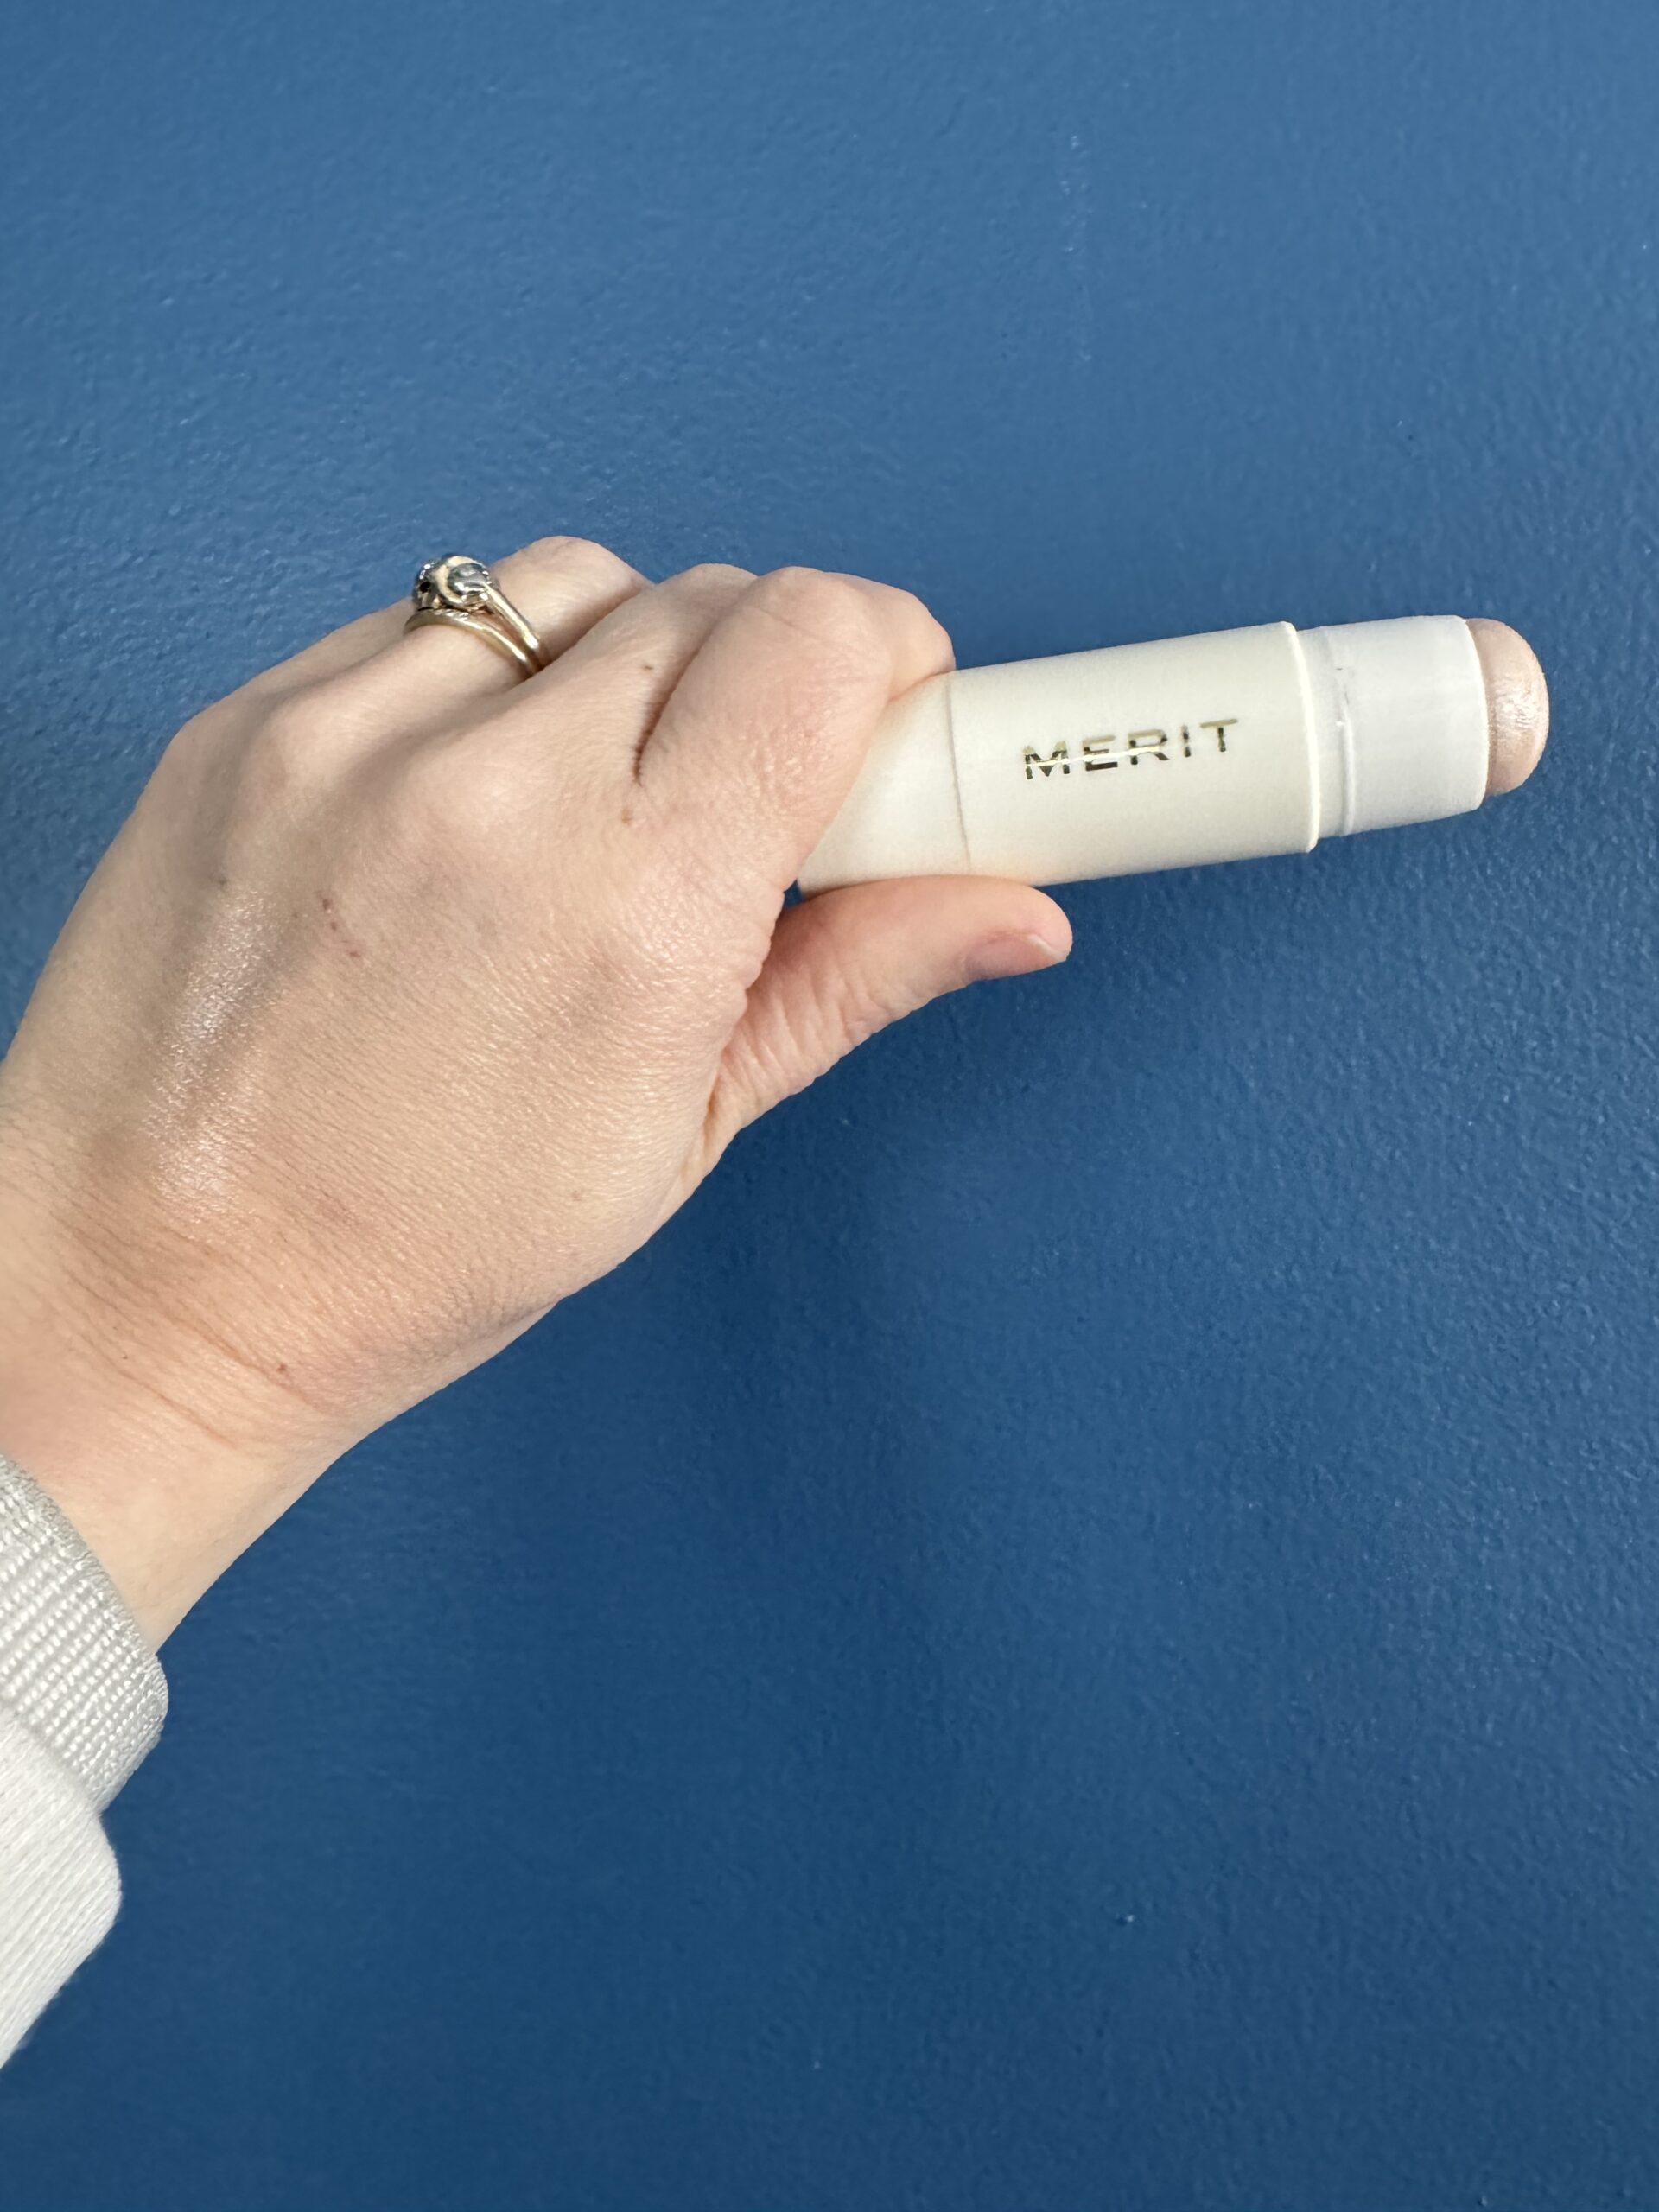 A hand holding a merit brand cosmetic product against a blue wall.